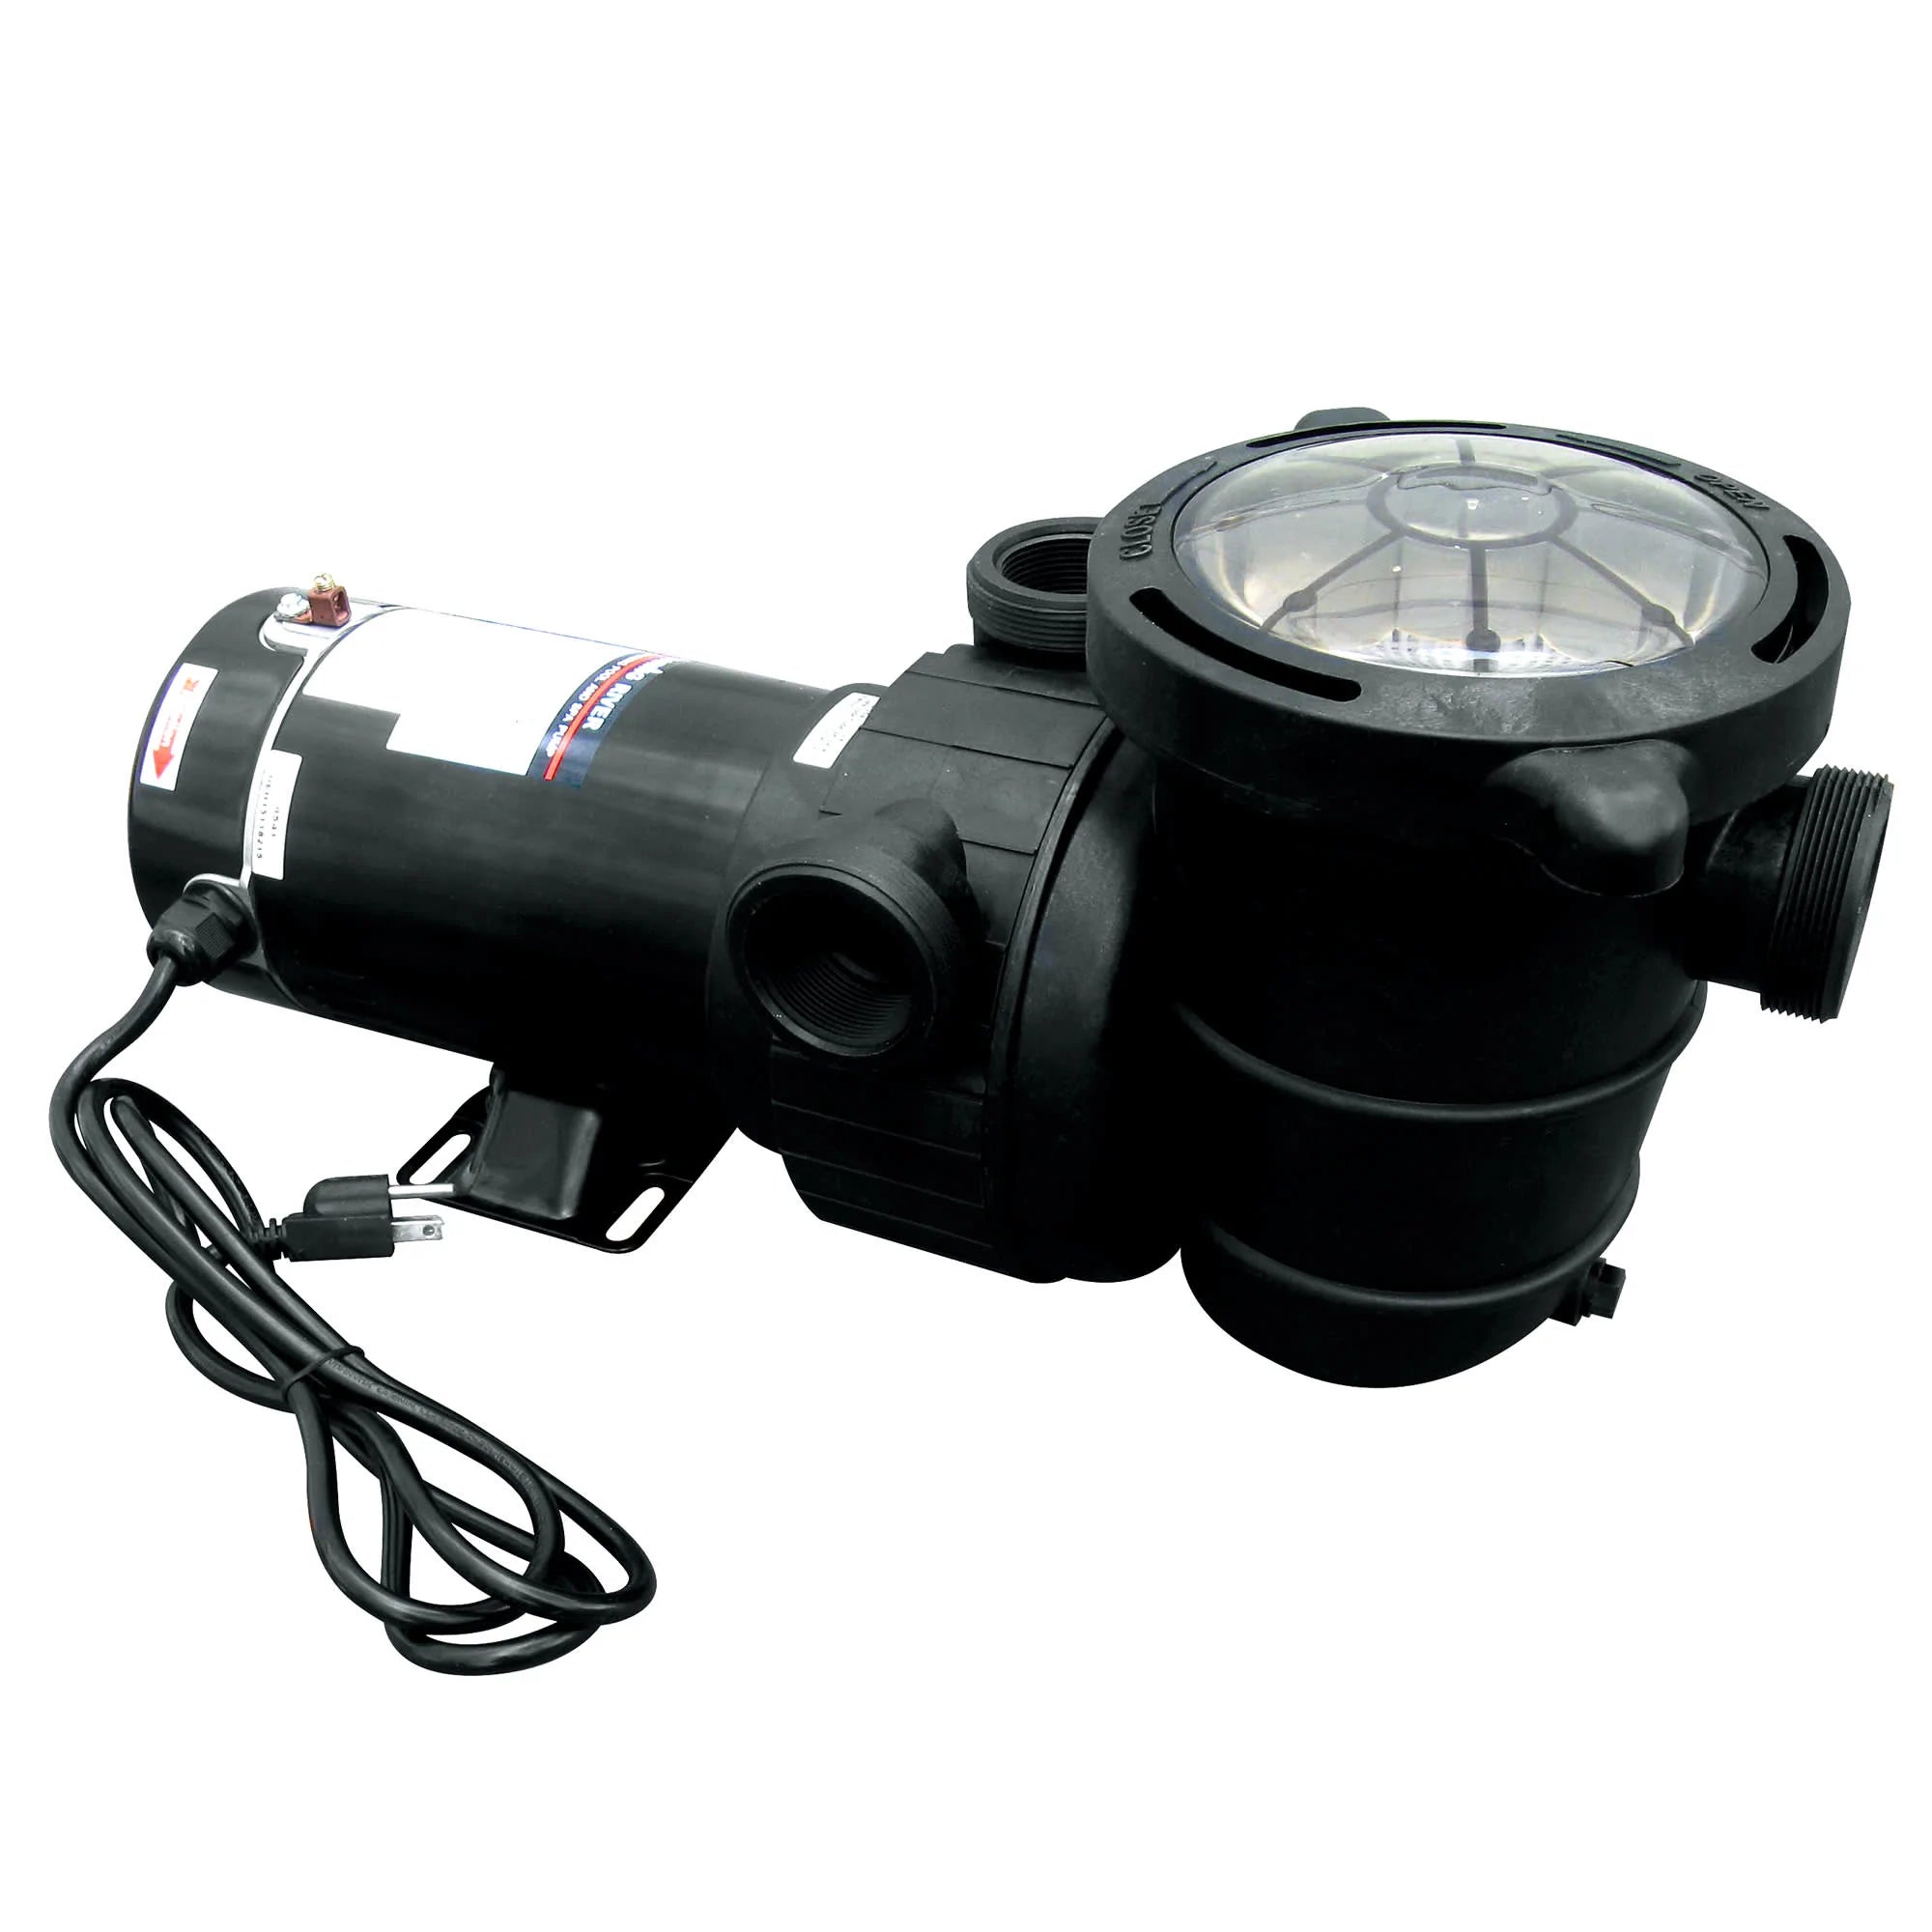 TidalWave Replacement Pump for Above Ground Pools